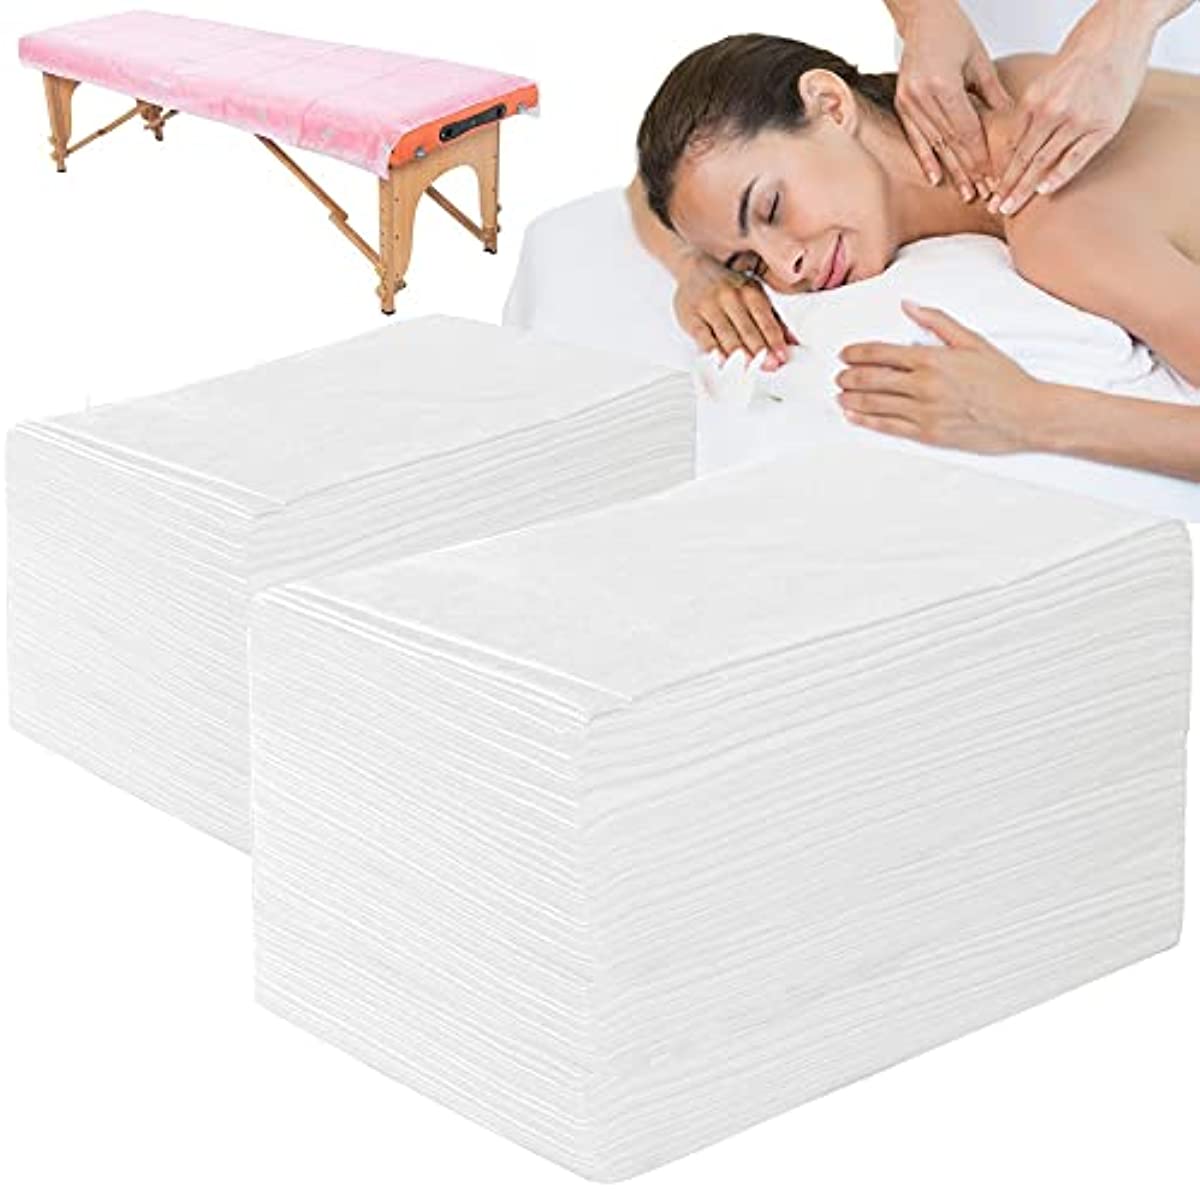 100 PCS Massage Table Sheets Disposable Non Woven SPA Bed Cover Breathable Polypropylene Fabric 31\" x 70\" Thin, Not Waterproof (White)